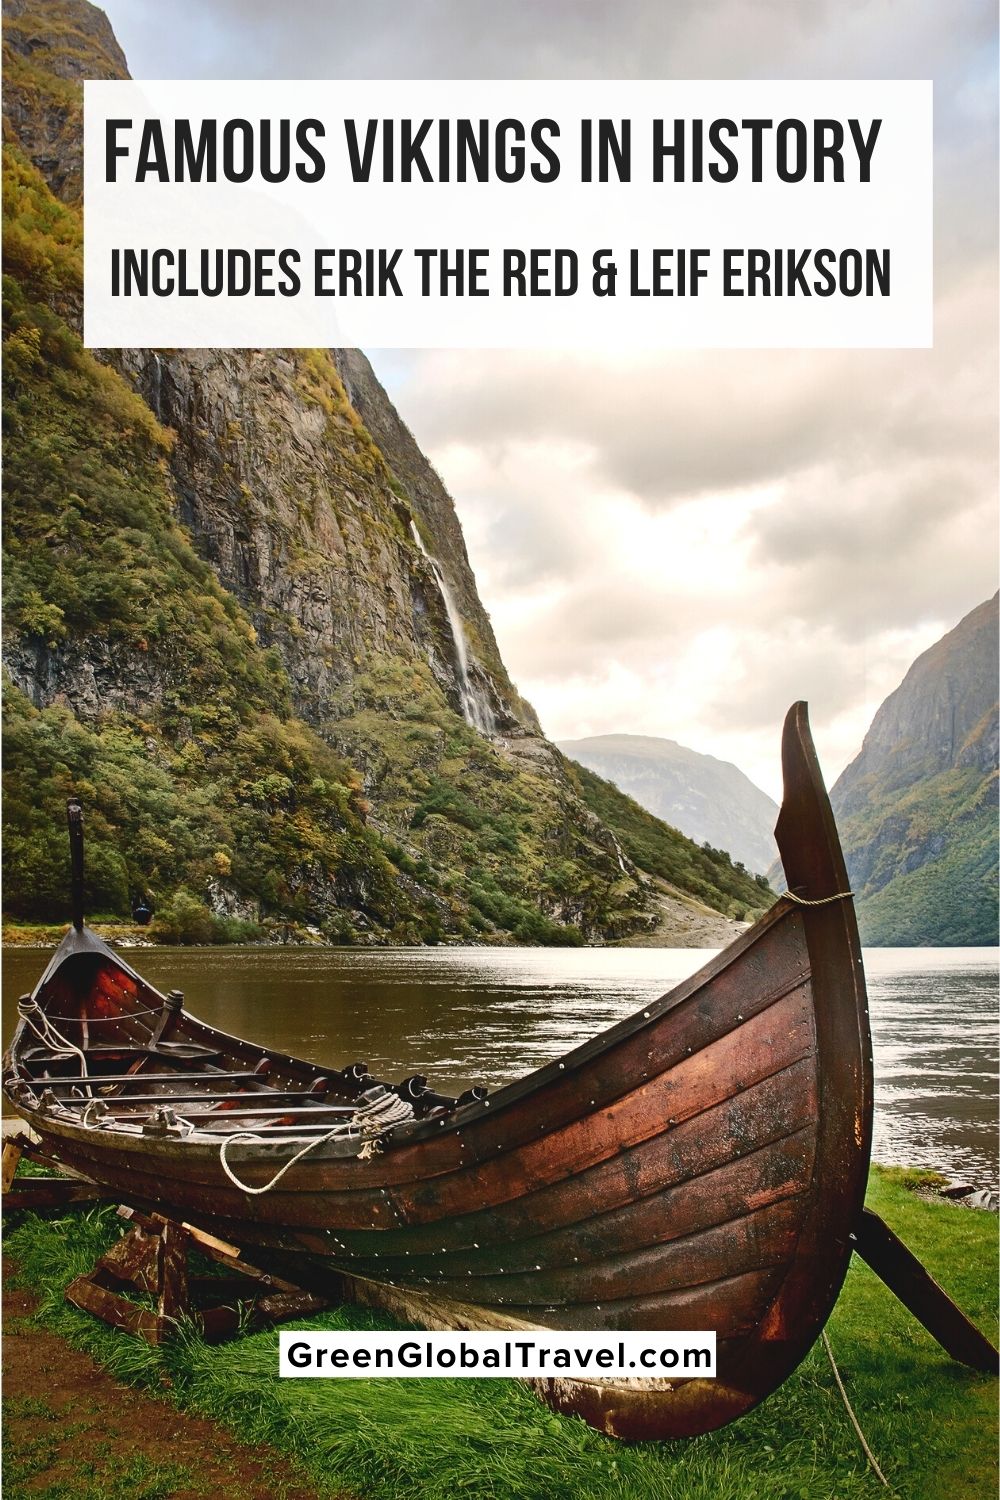 A look at the Vikings' westward expansion including the explorations of Leif Ericsson and his legendary father, Erik the Red.  Includes the history of Vikings in Iceland, Vikings in Greenland, and Vikings in Canada.